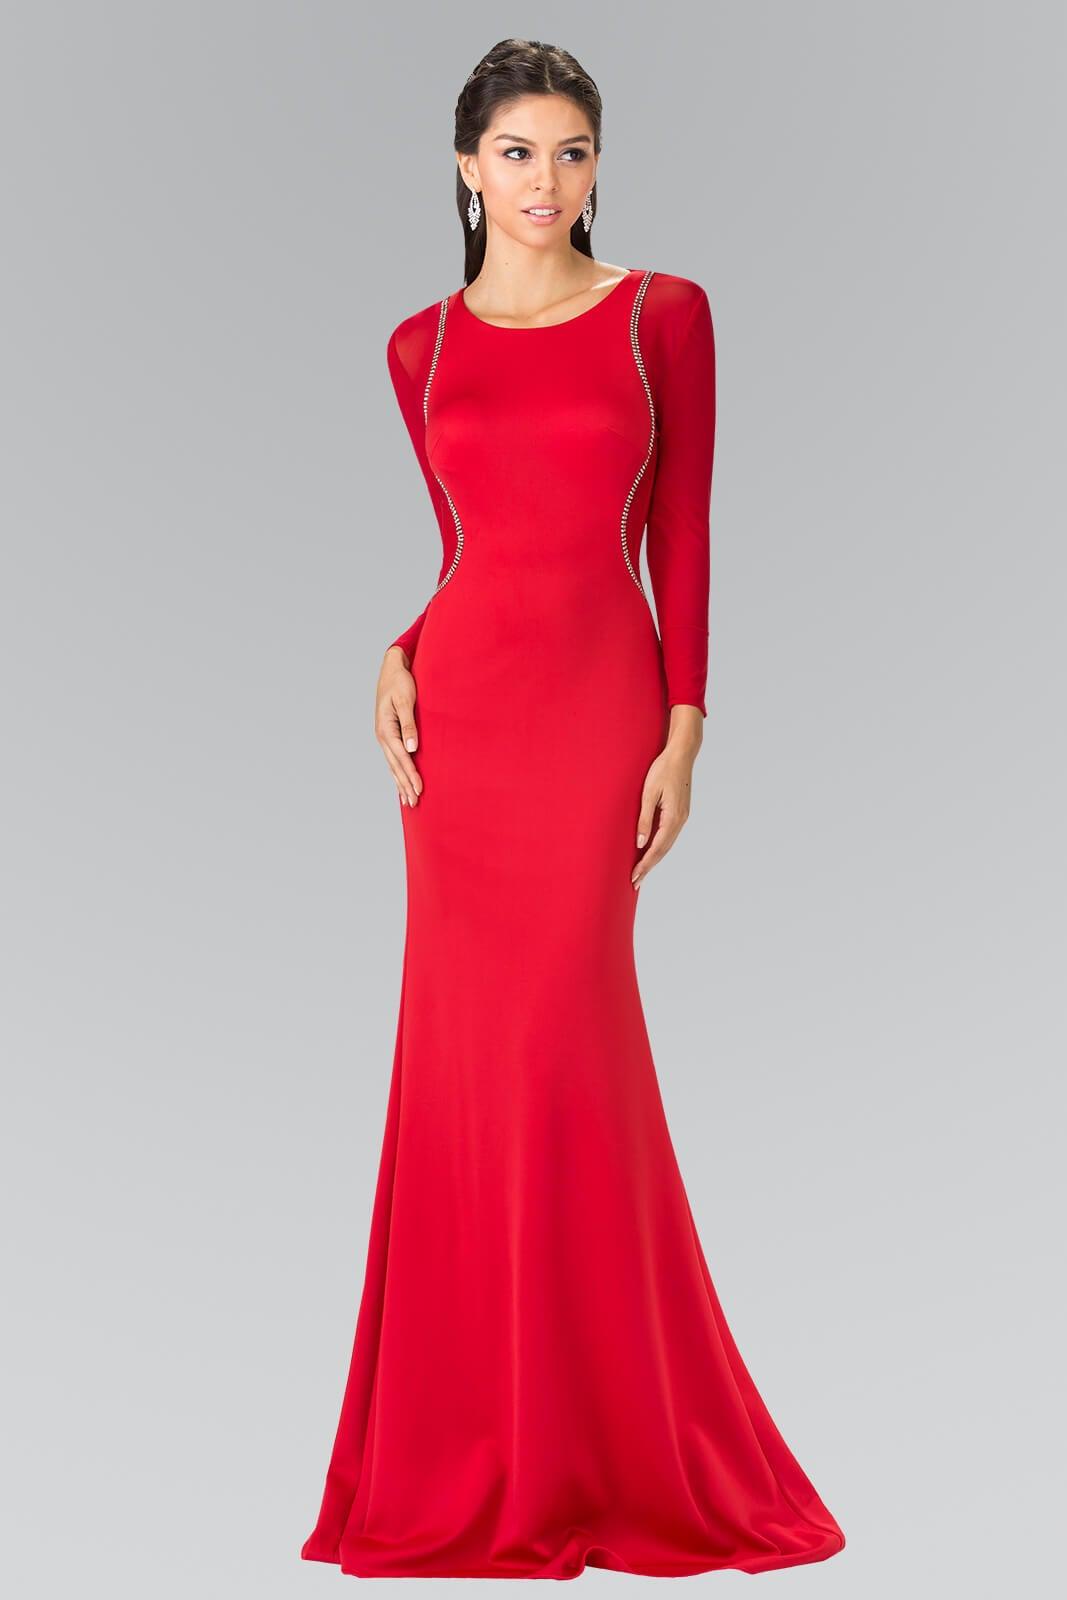 Fitted Long Prom Dress Evening Gown Red